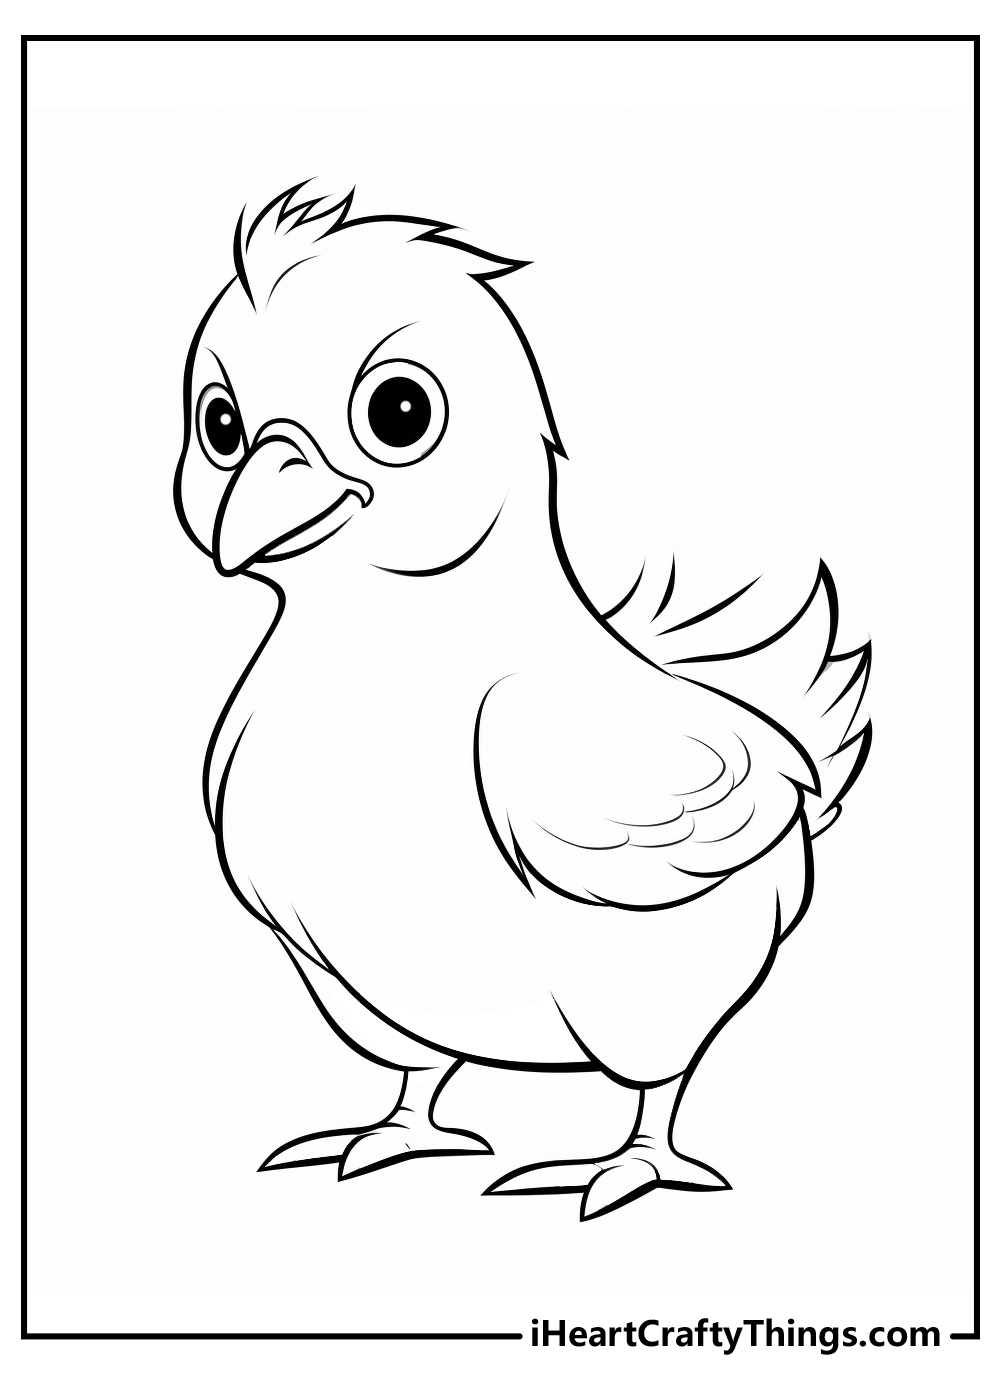 black-and-white chicken coloring pages